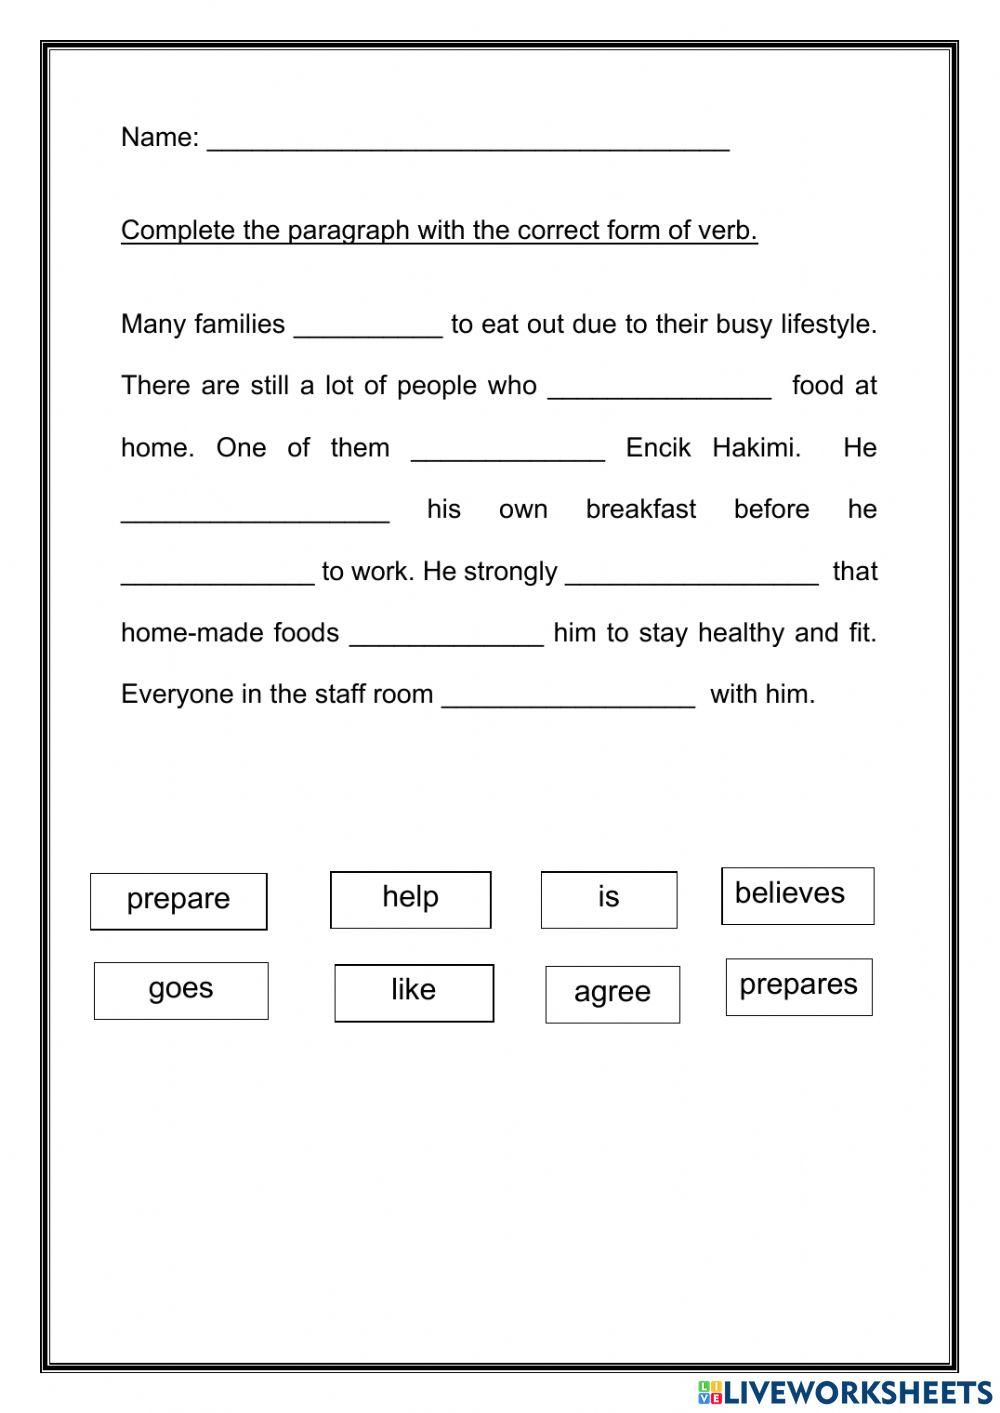 EXERCISE subject-verb agreement